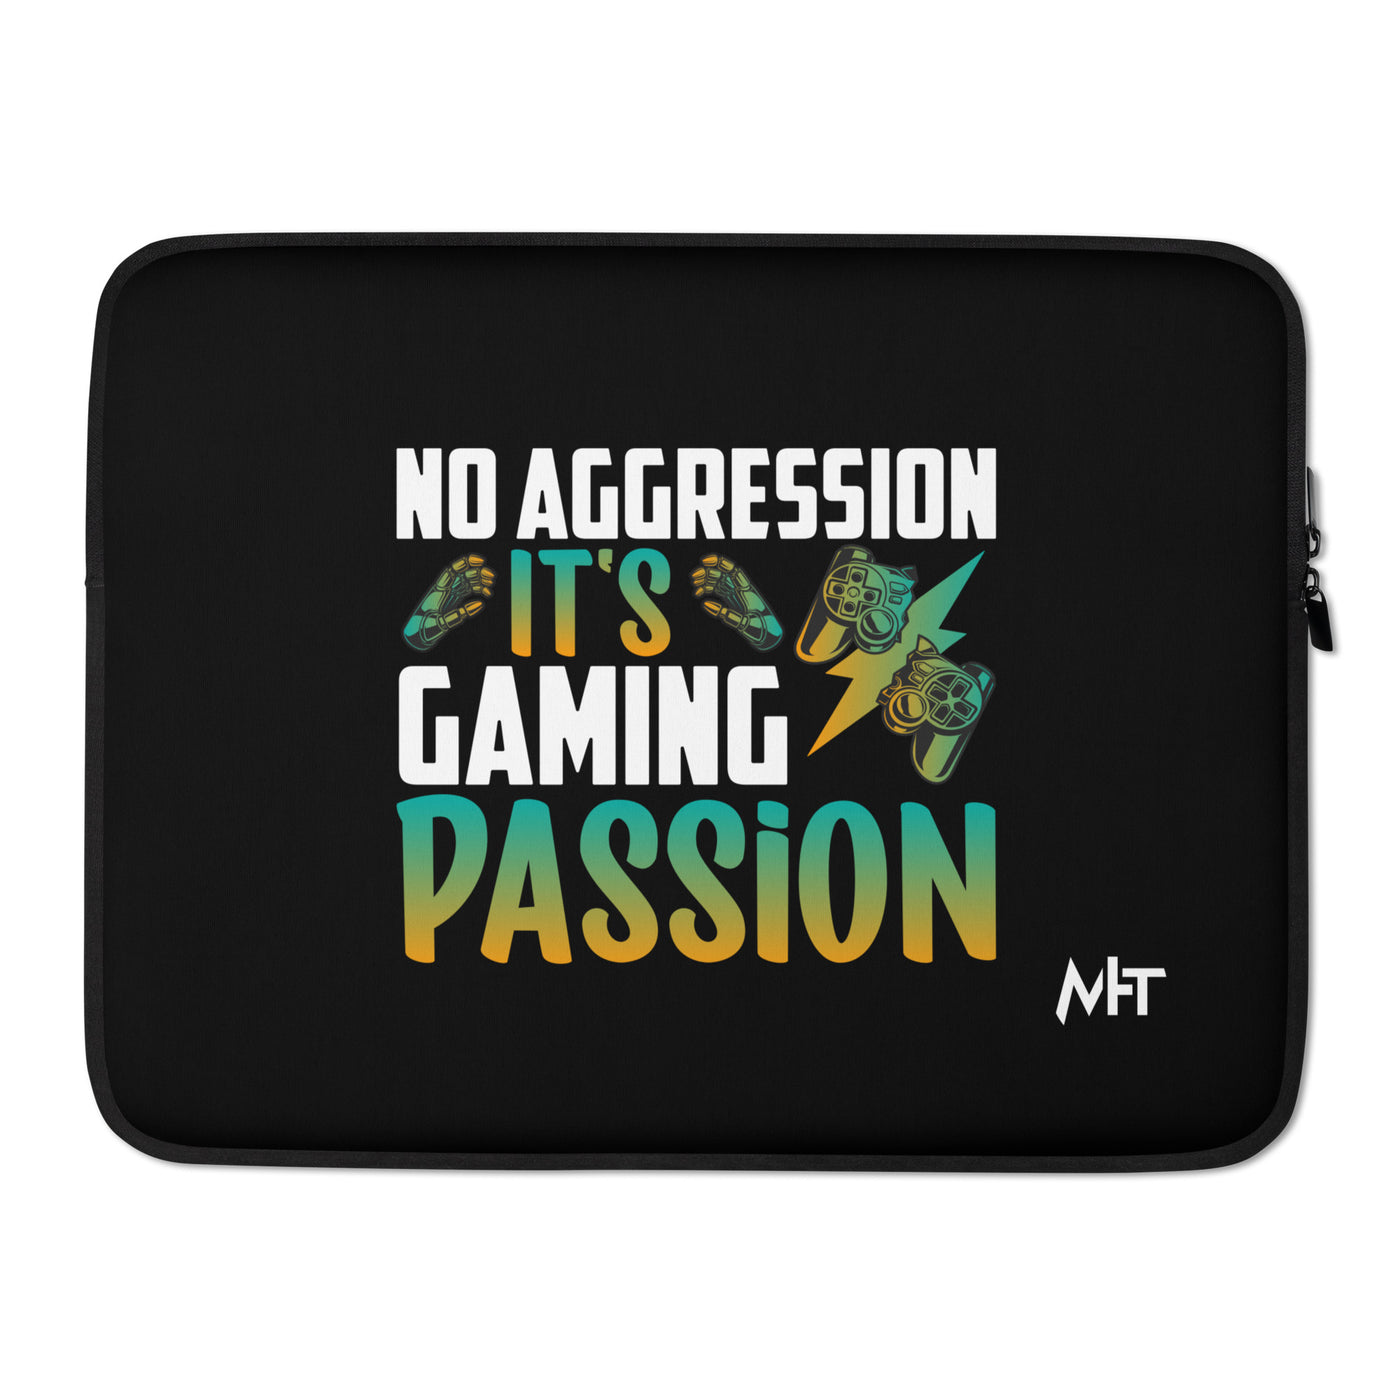 No Aggression, It's Gaming Passion - Laptop Sleeve